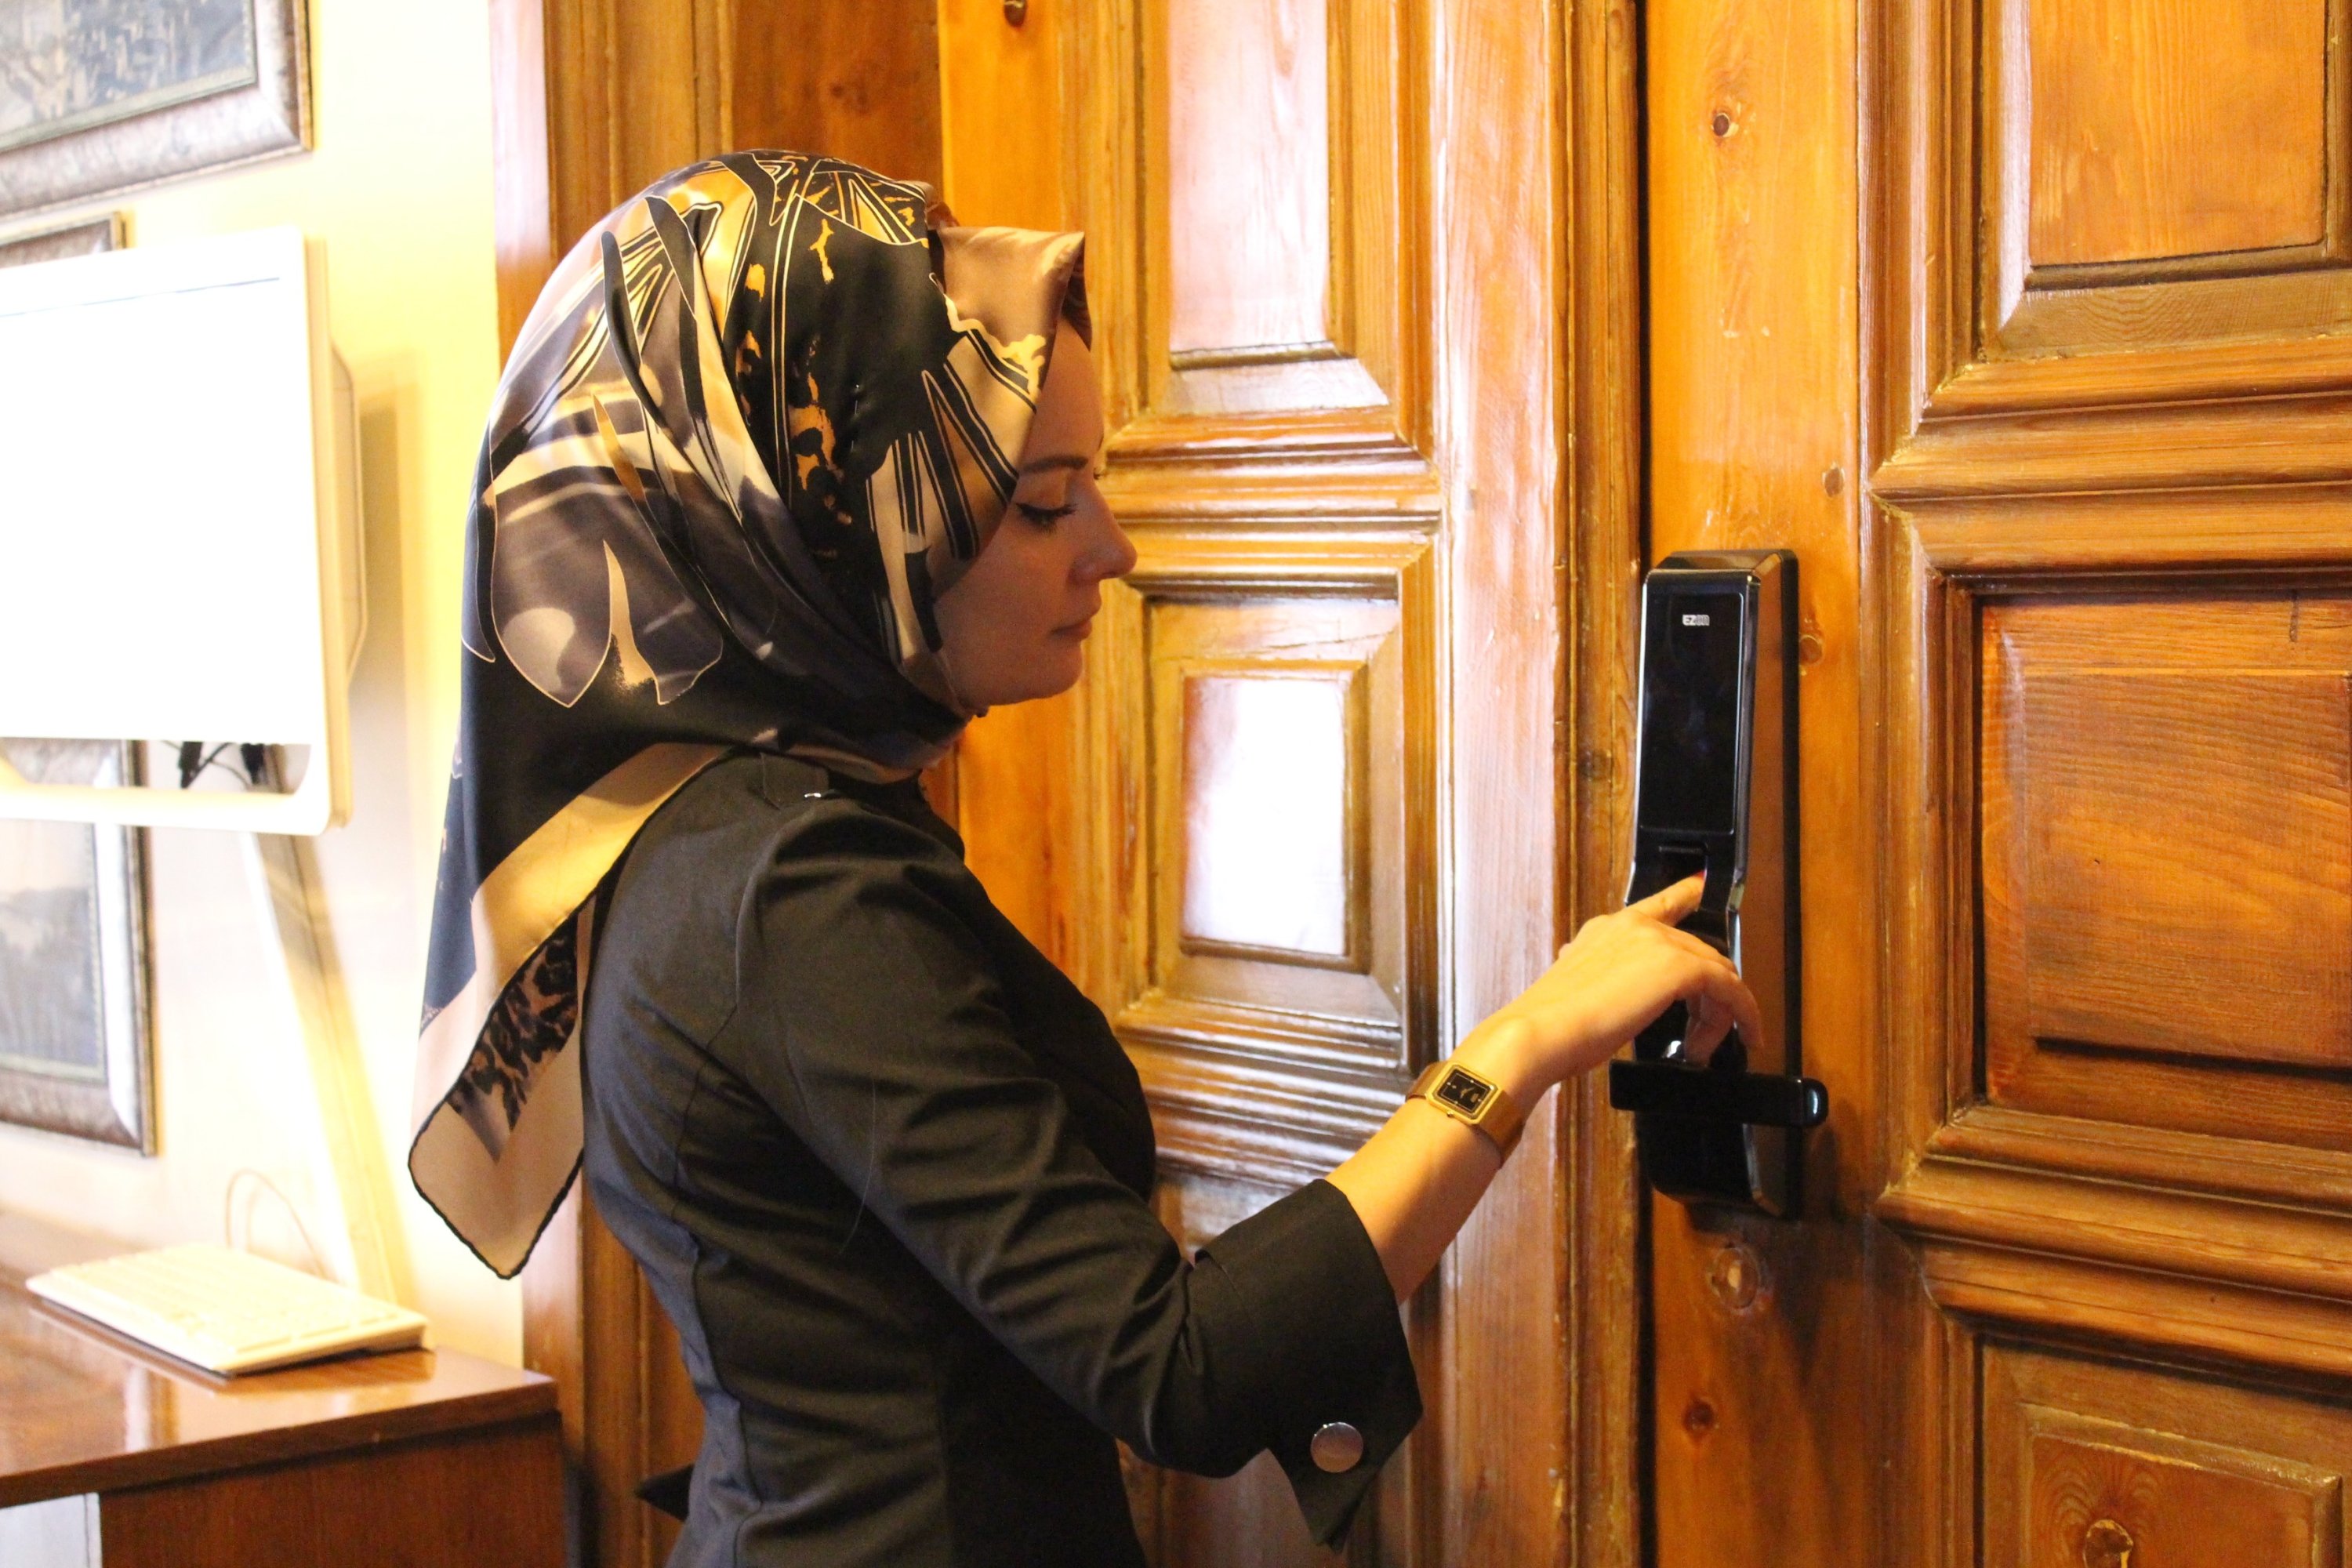 A door and security device seen in the historic Ziyabey Manuscripts Library in Sivas, eastern Turkey, Nov. 18, 2021. (IHA Photo)